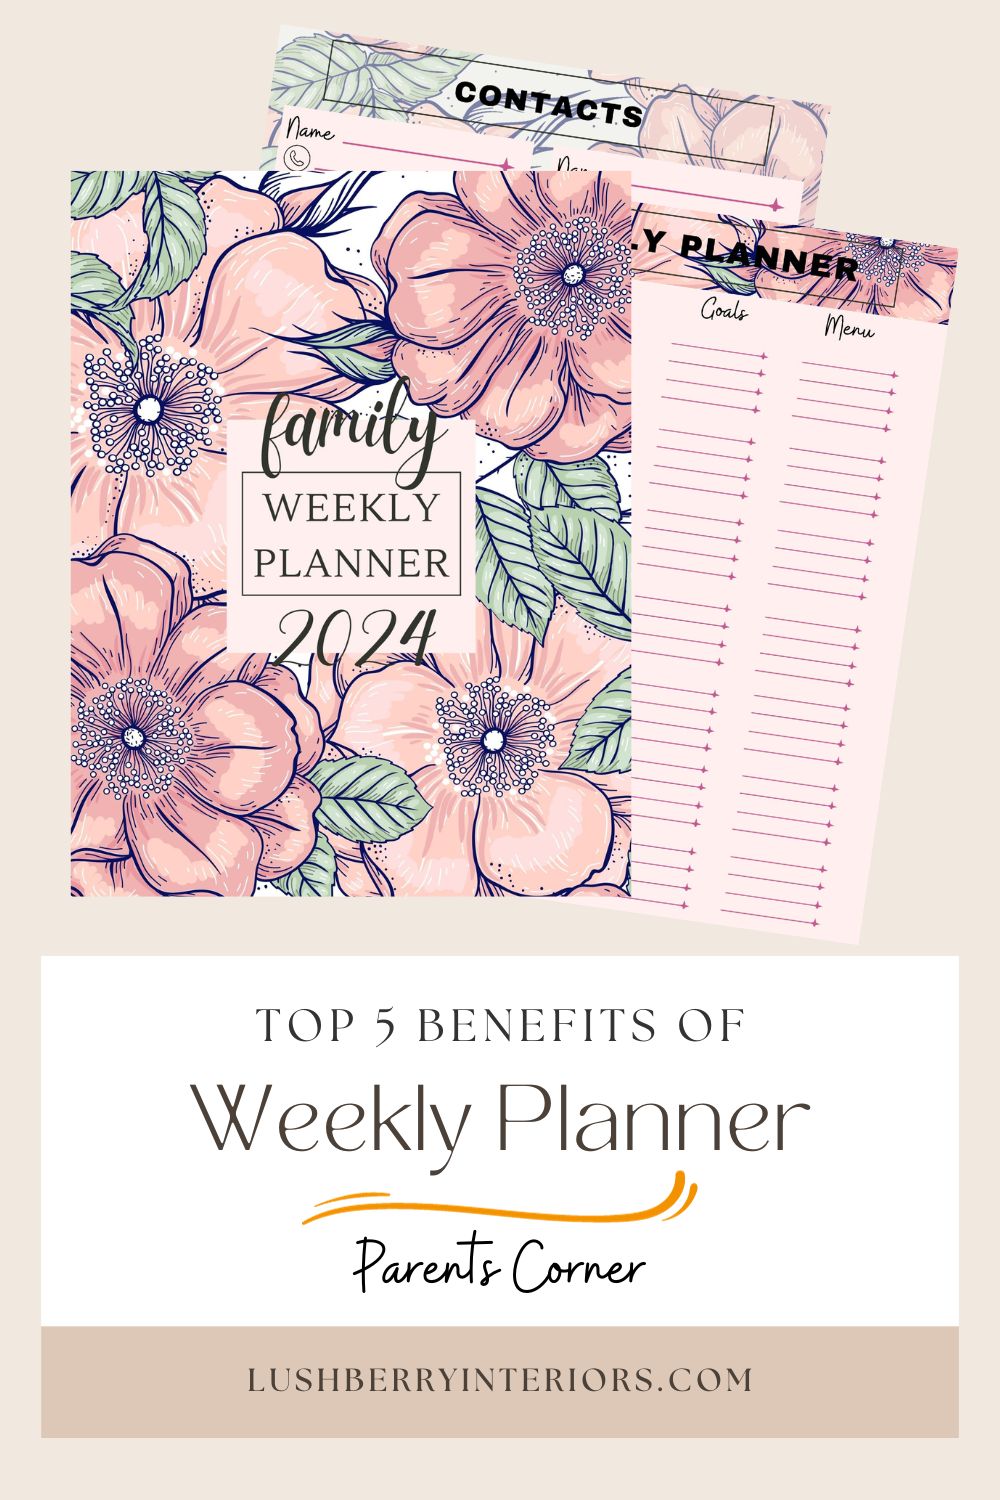 Download the Free Printable Weekly Planner Today